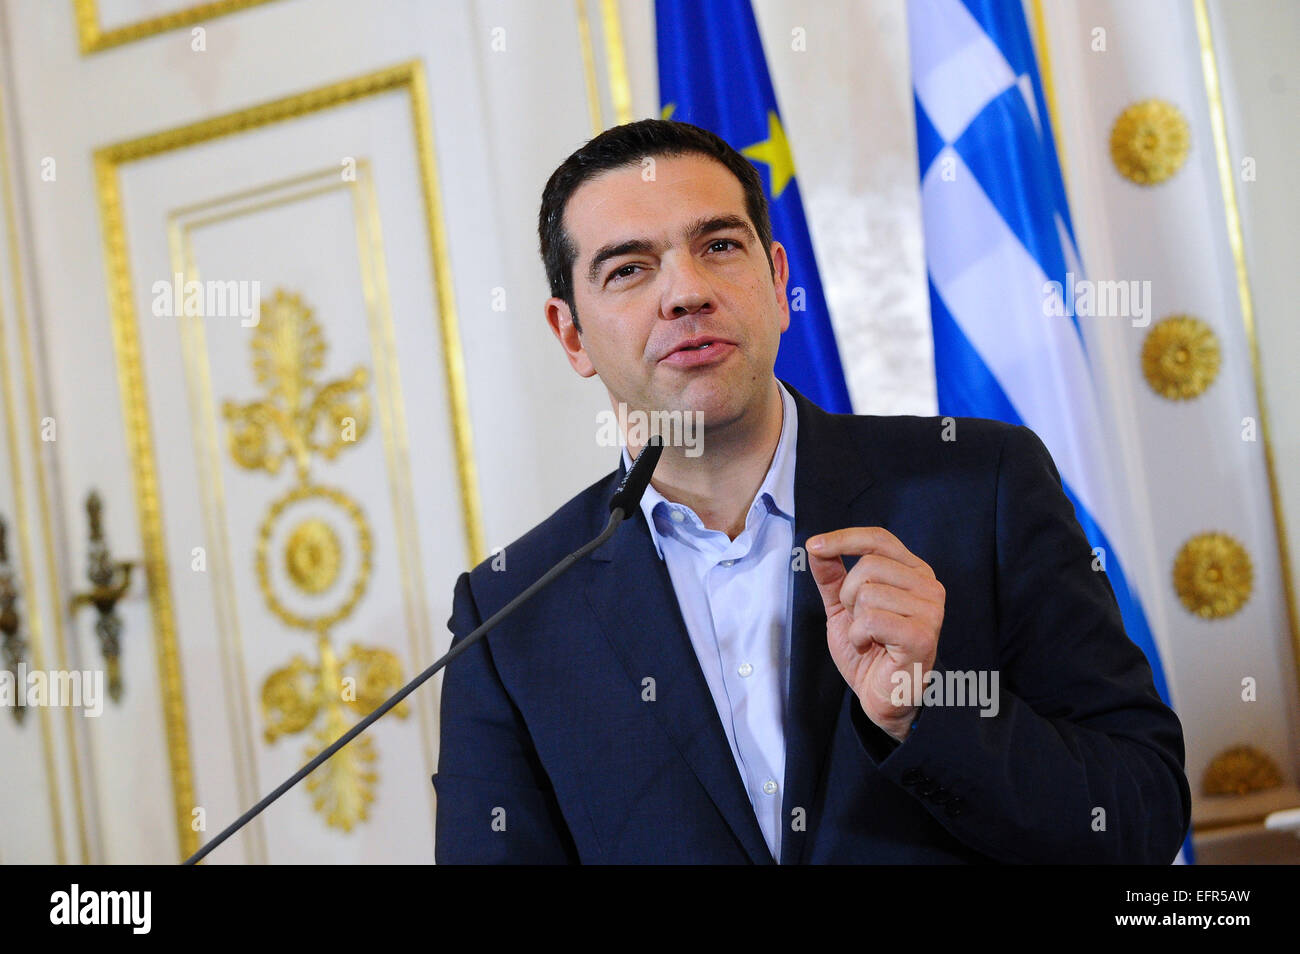 (150209) -- VIENNA, Feb. 9, 2015 (Xinhua) -- Greece's Prime Minister Alexis Tsipras attends a joint press briefing after meeting with his Austrian counterpart Chancellor Werner Faymann in Vienna, capital of Austria, on Feb. 9, 2015. Greece's newly elected Prime Minister Alexis Tsipras said on Monday he was confident of striking a deal with European partners. (Xinhua/Qian Yi) Stock Photo